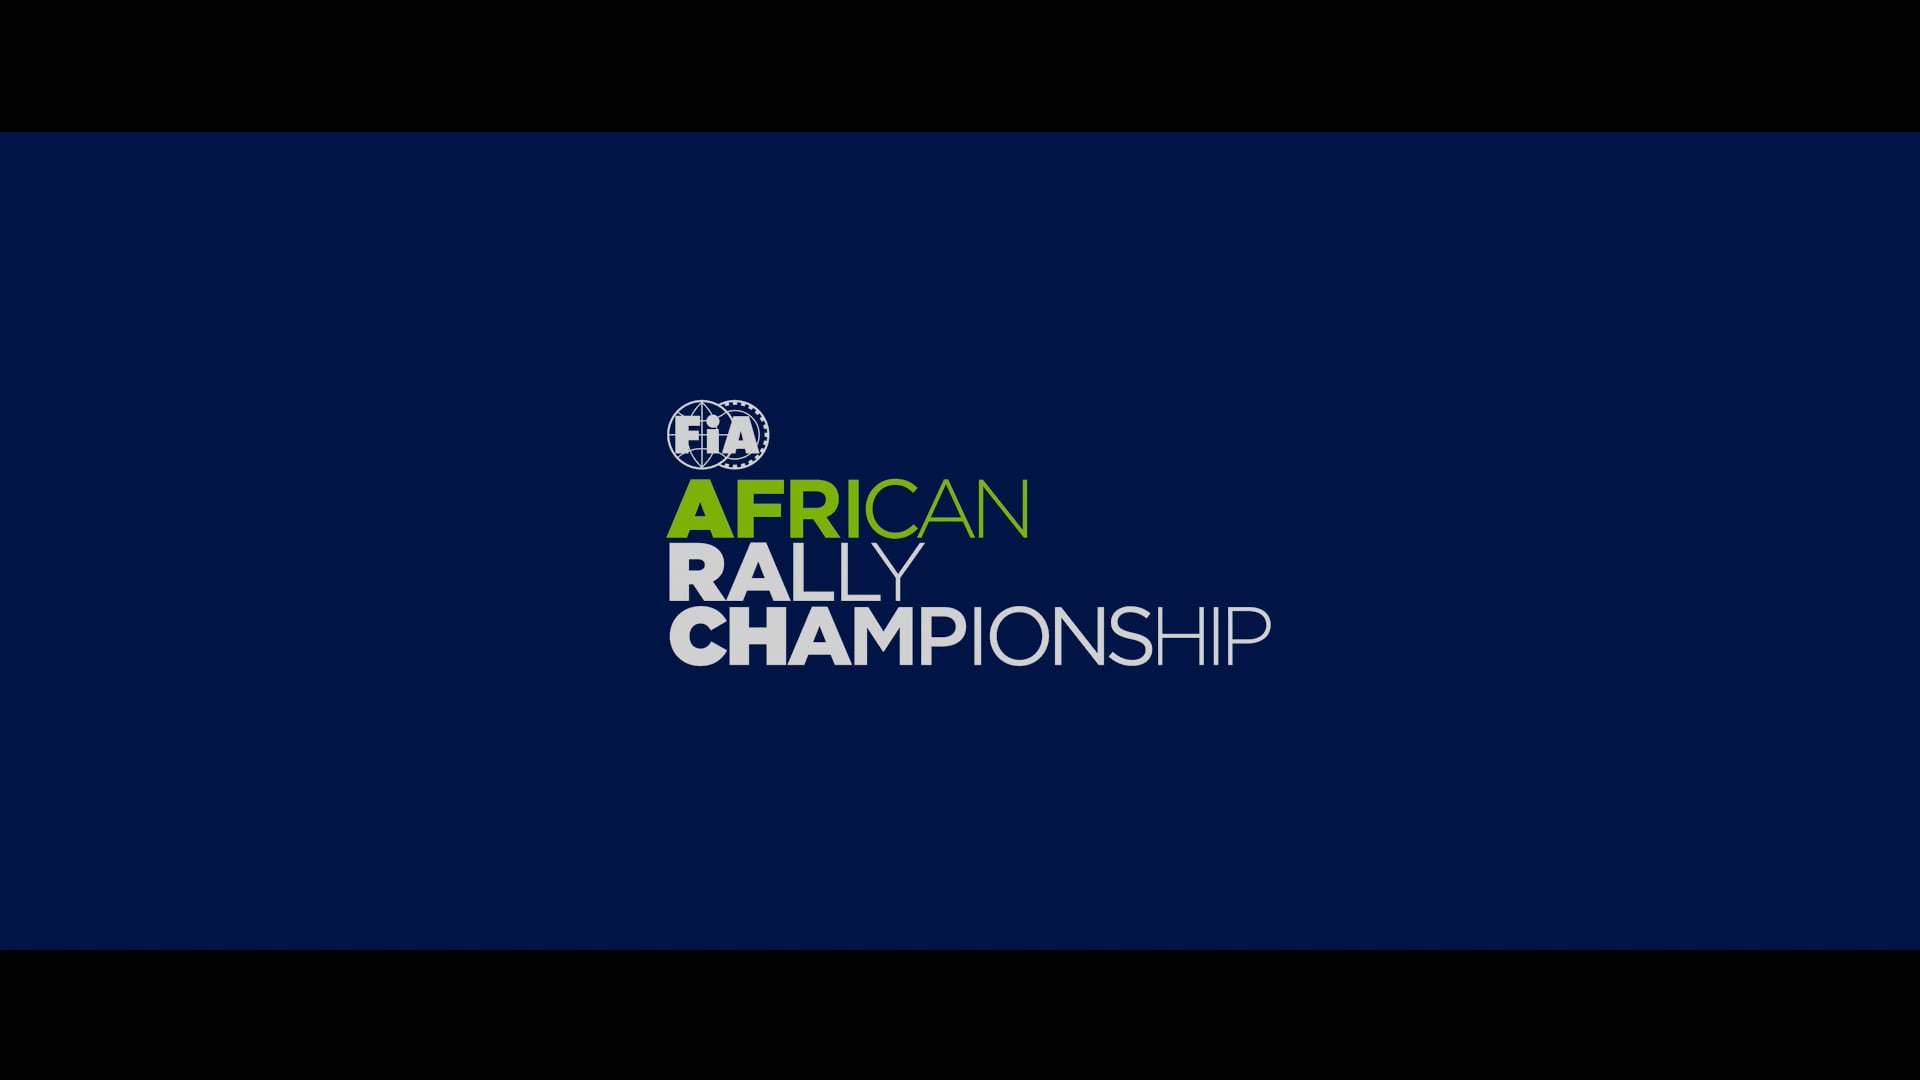 FIA African Rally Championship